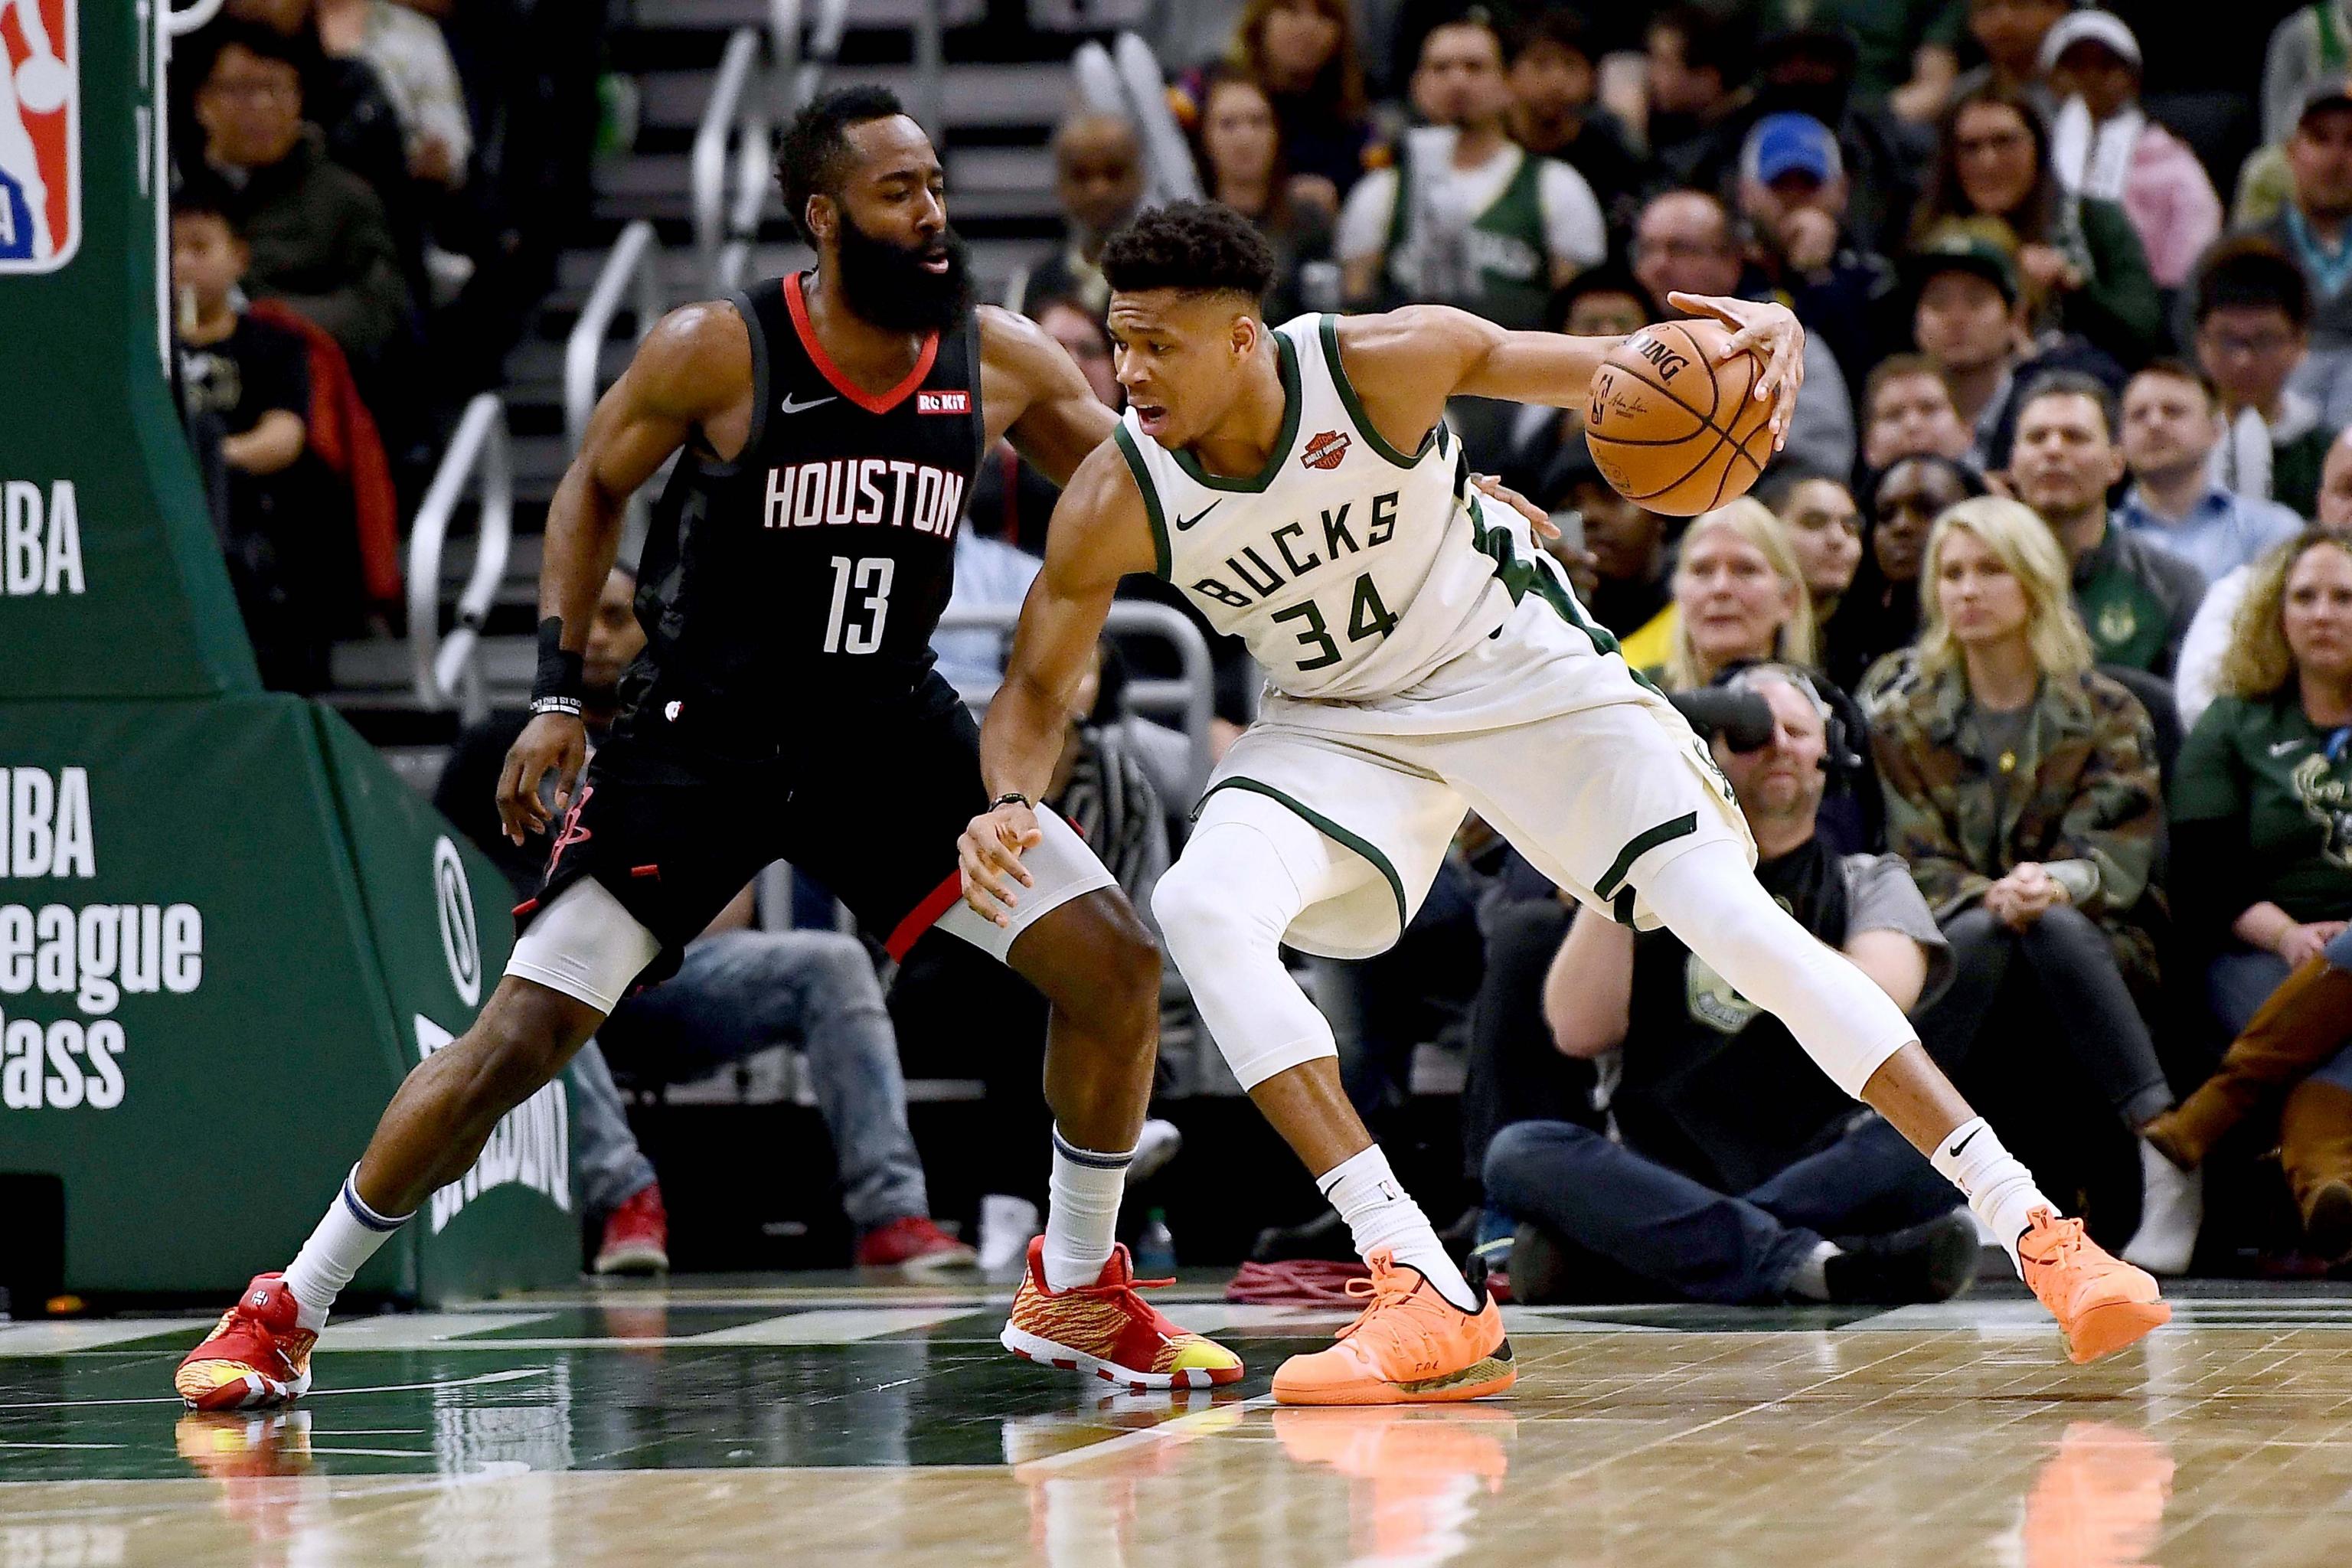 Why Giannis Antetokounmpo is a possible sleeper for 2017-18 NBA MVP